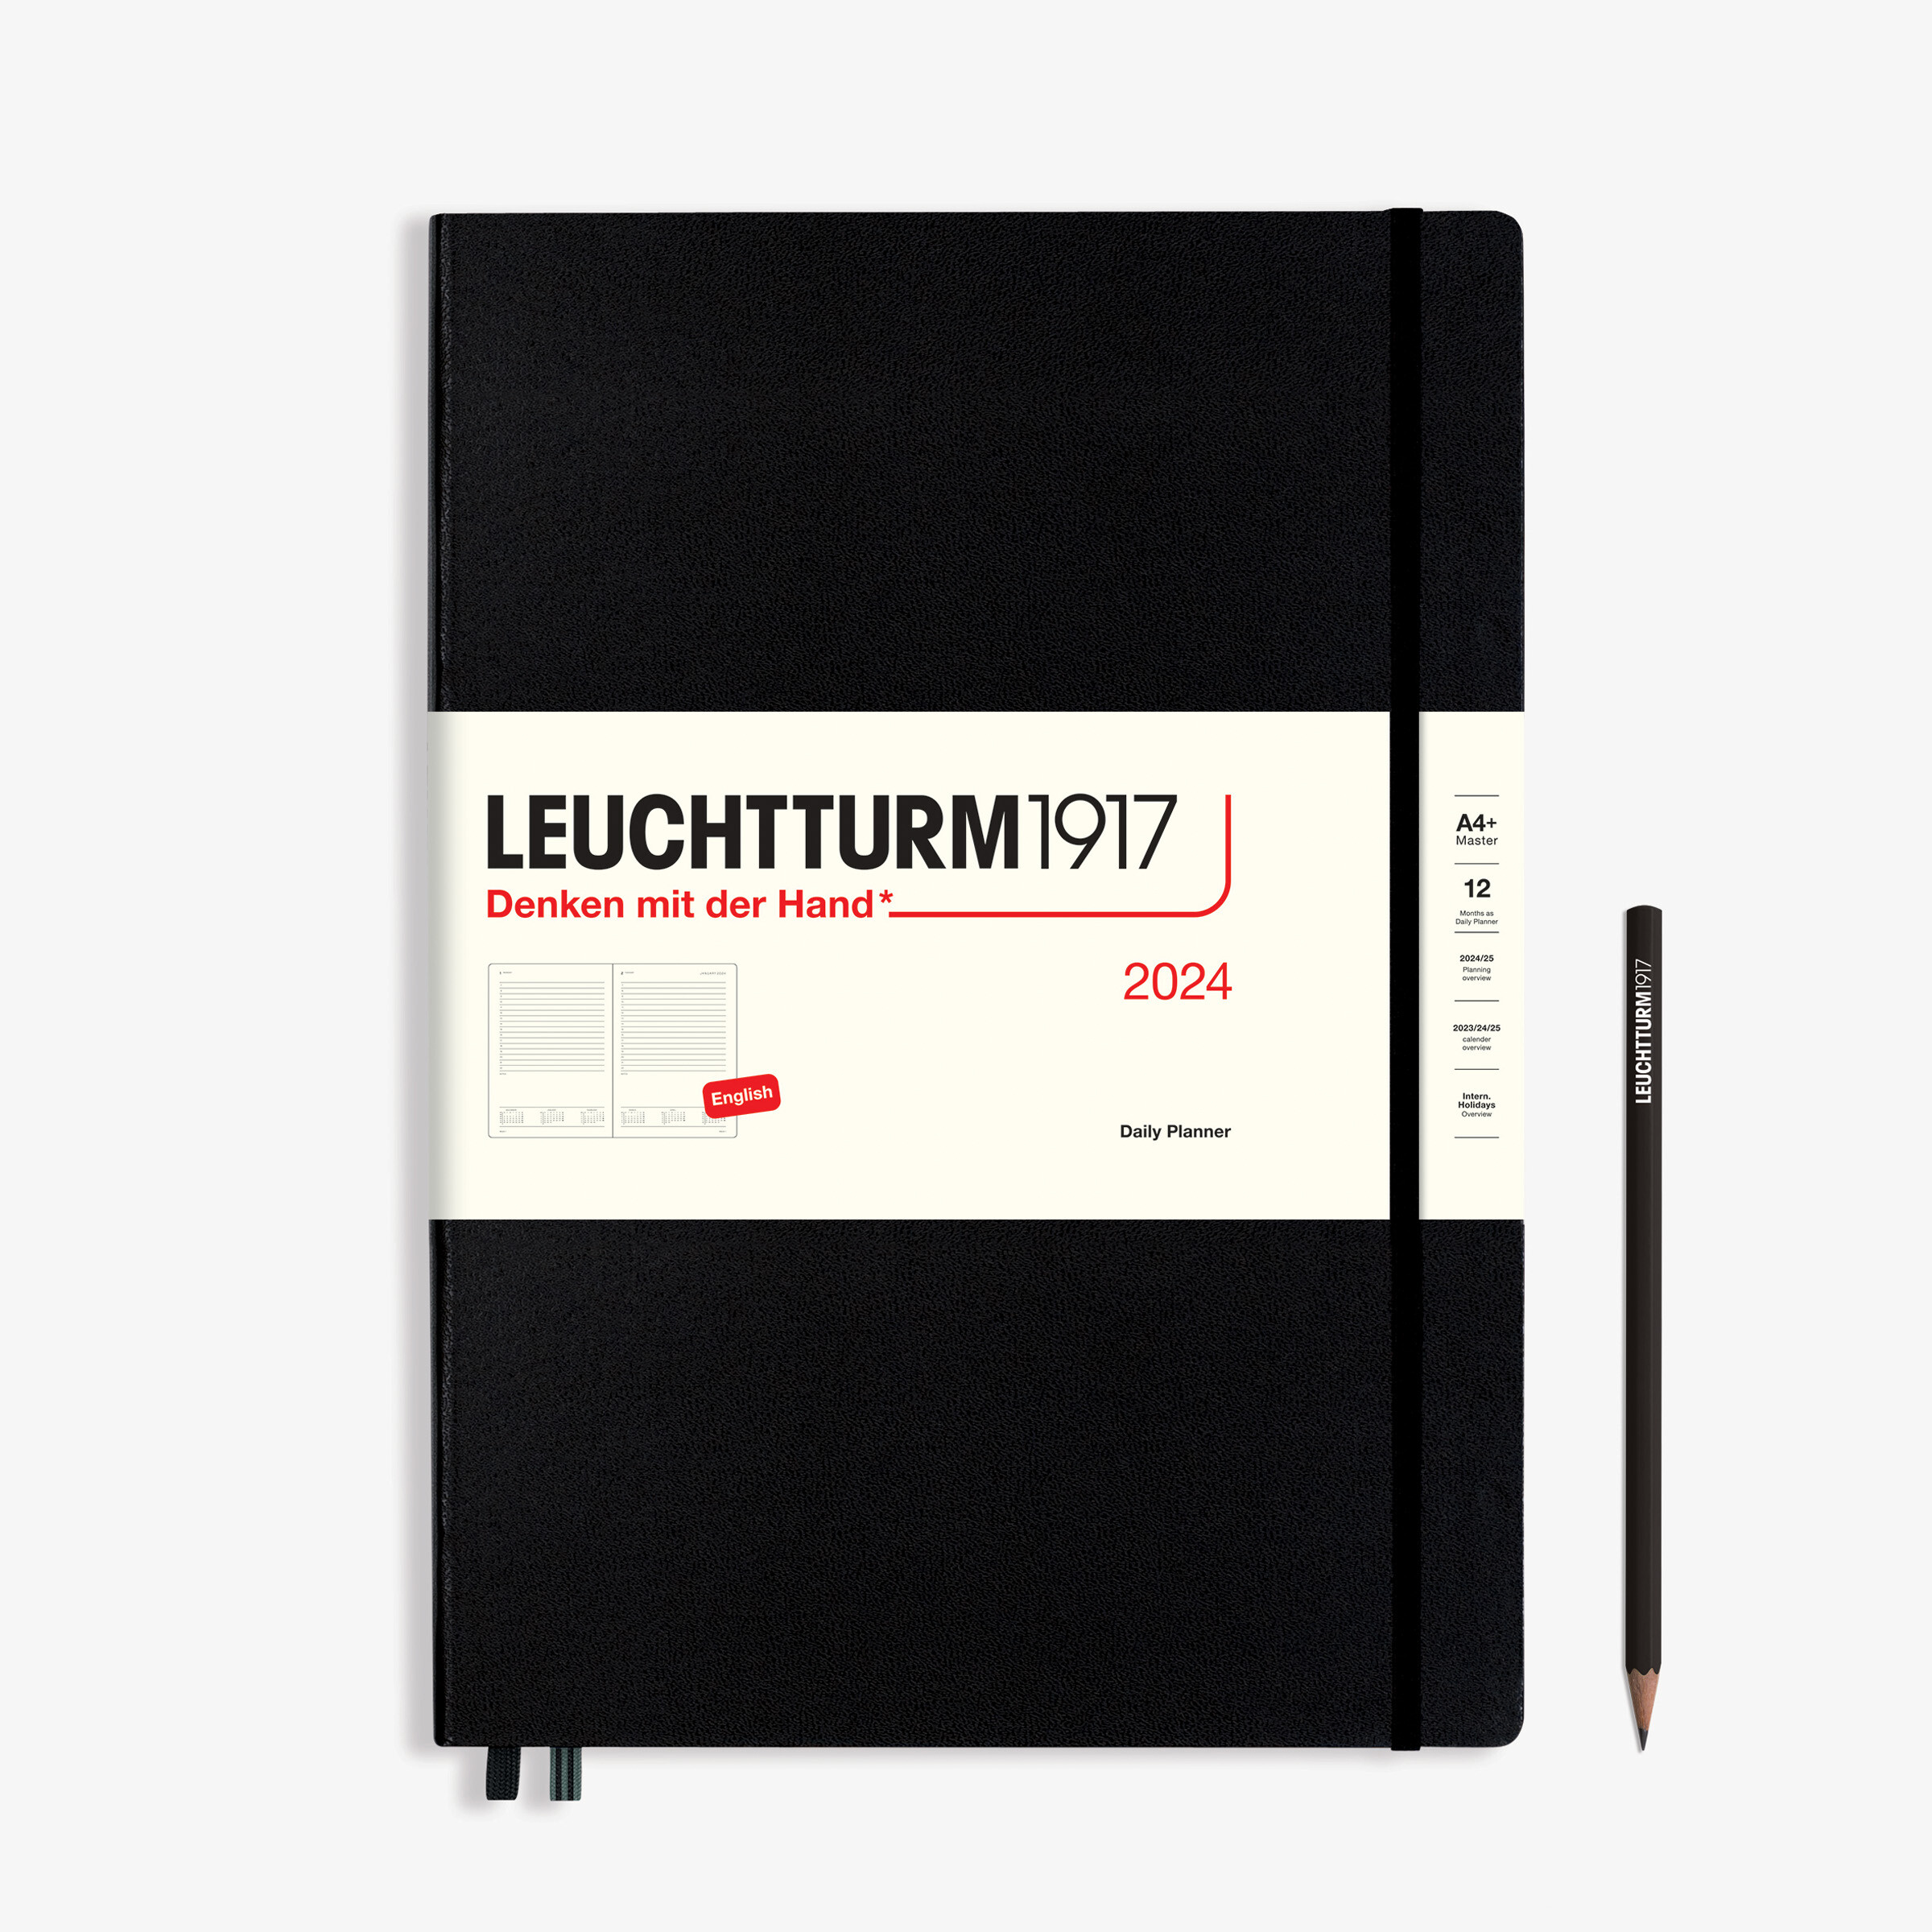 Leuchtturm1917 Daily Planner Hard Cover Master A4+ 2024 - Pencraft the boutique